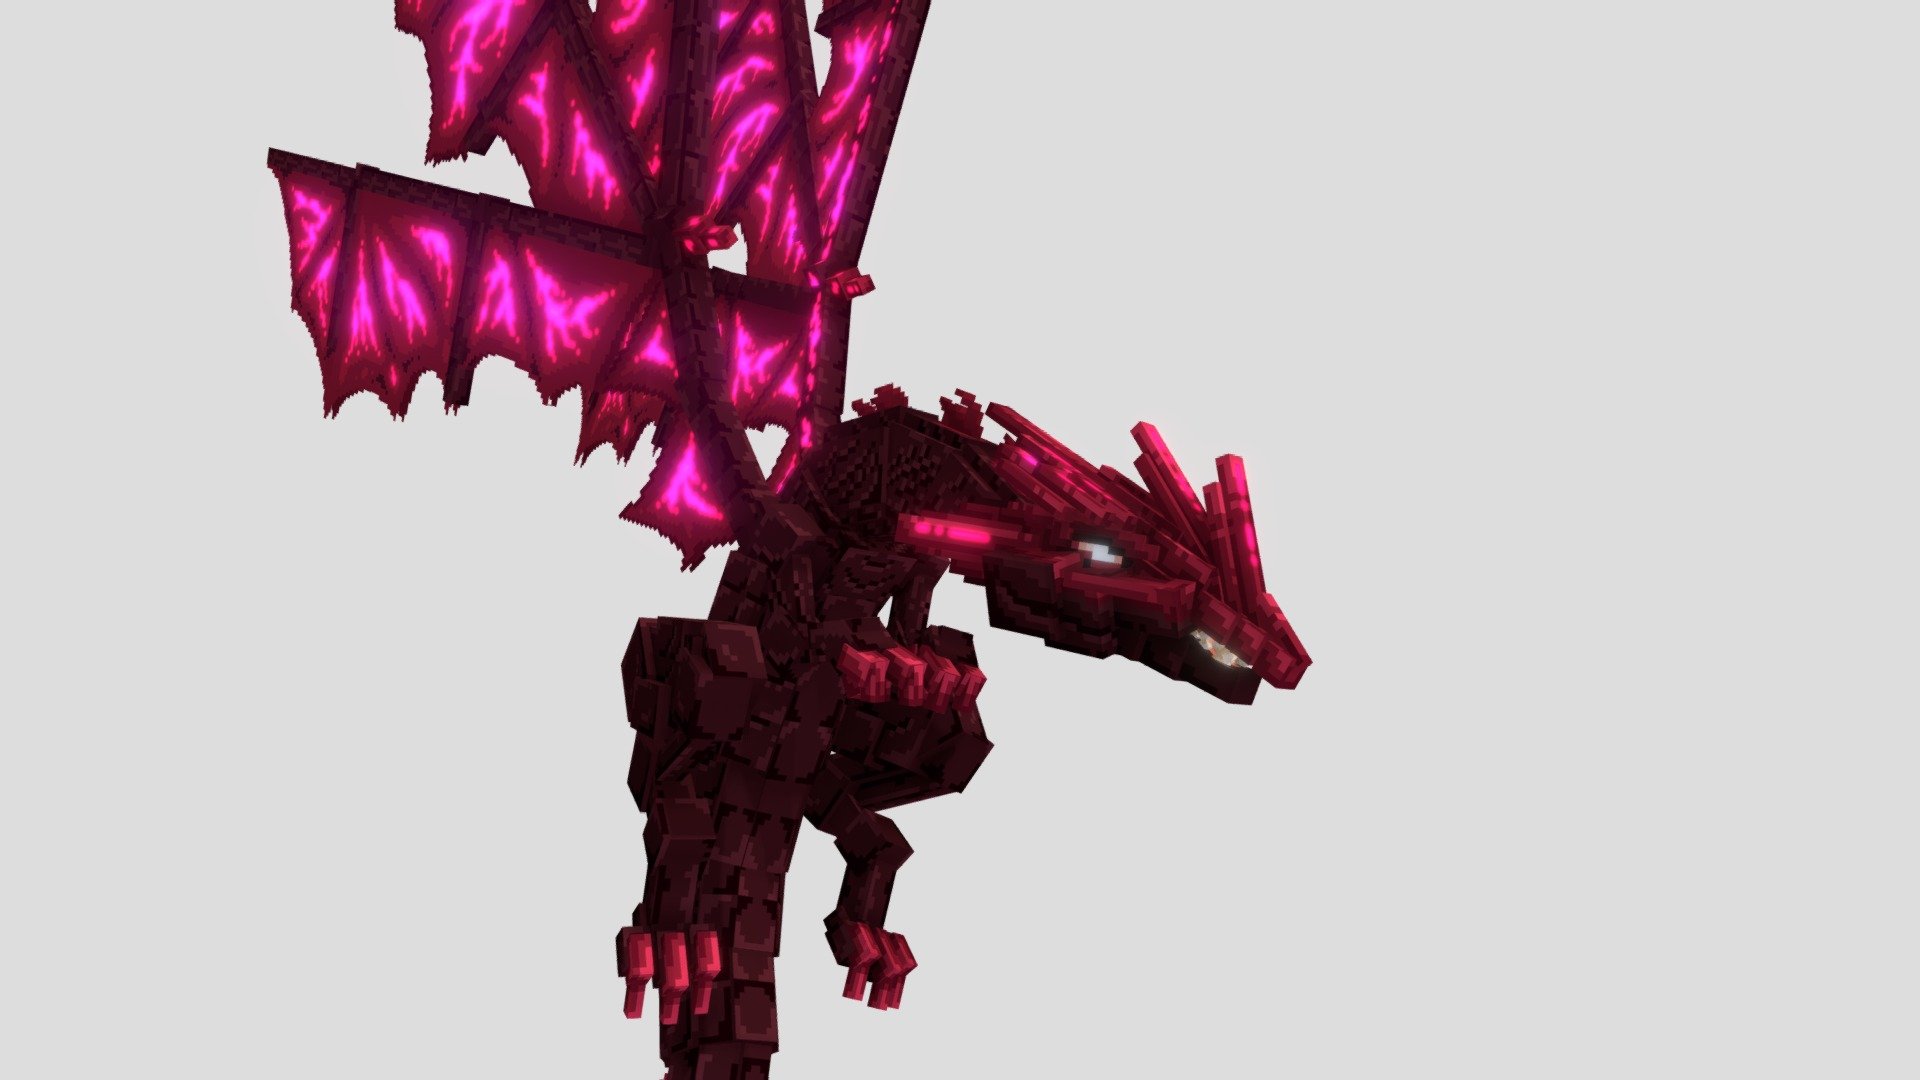 Void Dragon, animated Blockbench model.

Please, if you do, send links to your epic cinematics created with this asset!

Find additional assets at https://artsbykevstudio.com - Void Dragon - Blockbench Model - Buy Royalty Free 3D model by ArtsByKev Productions (@ArtsByKev) 3d model